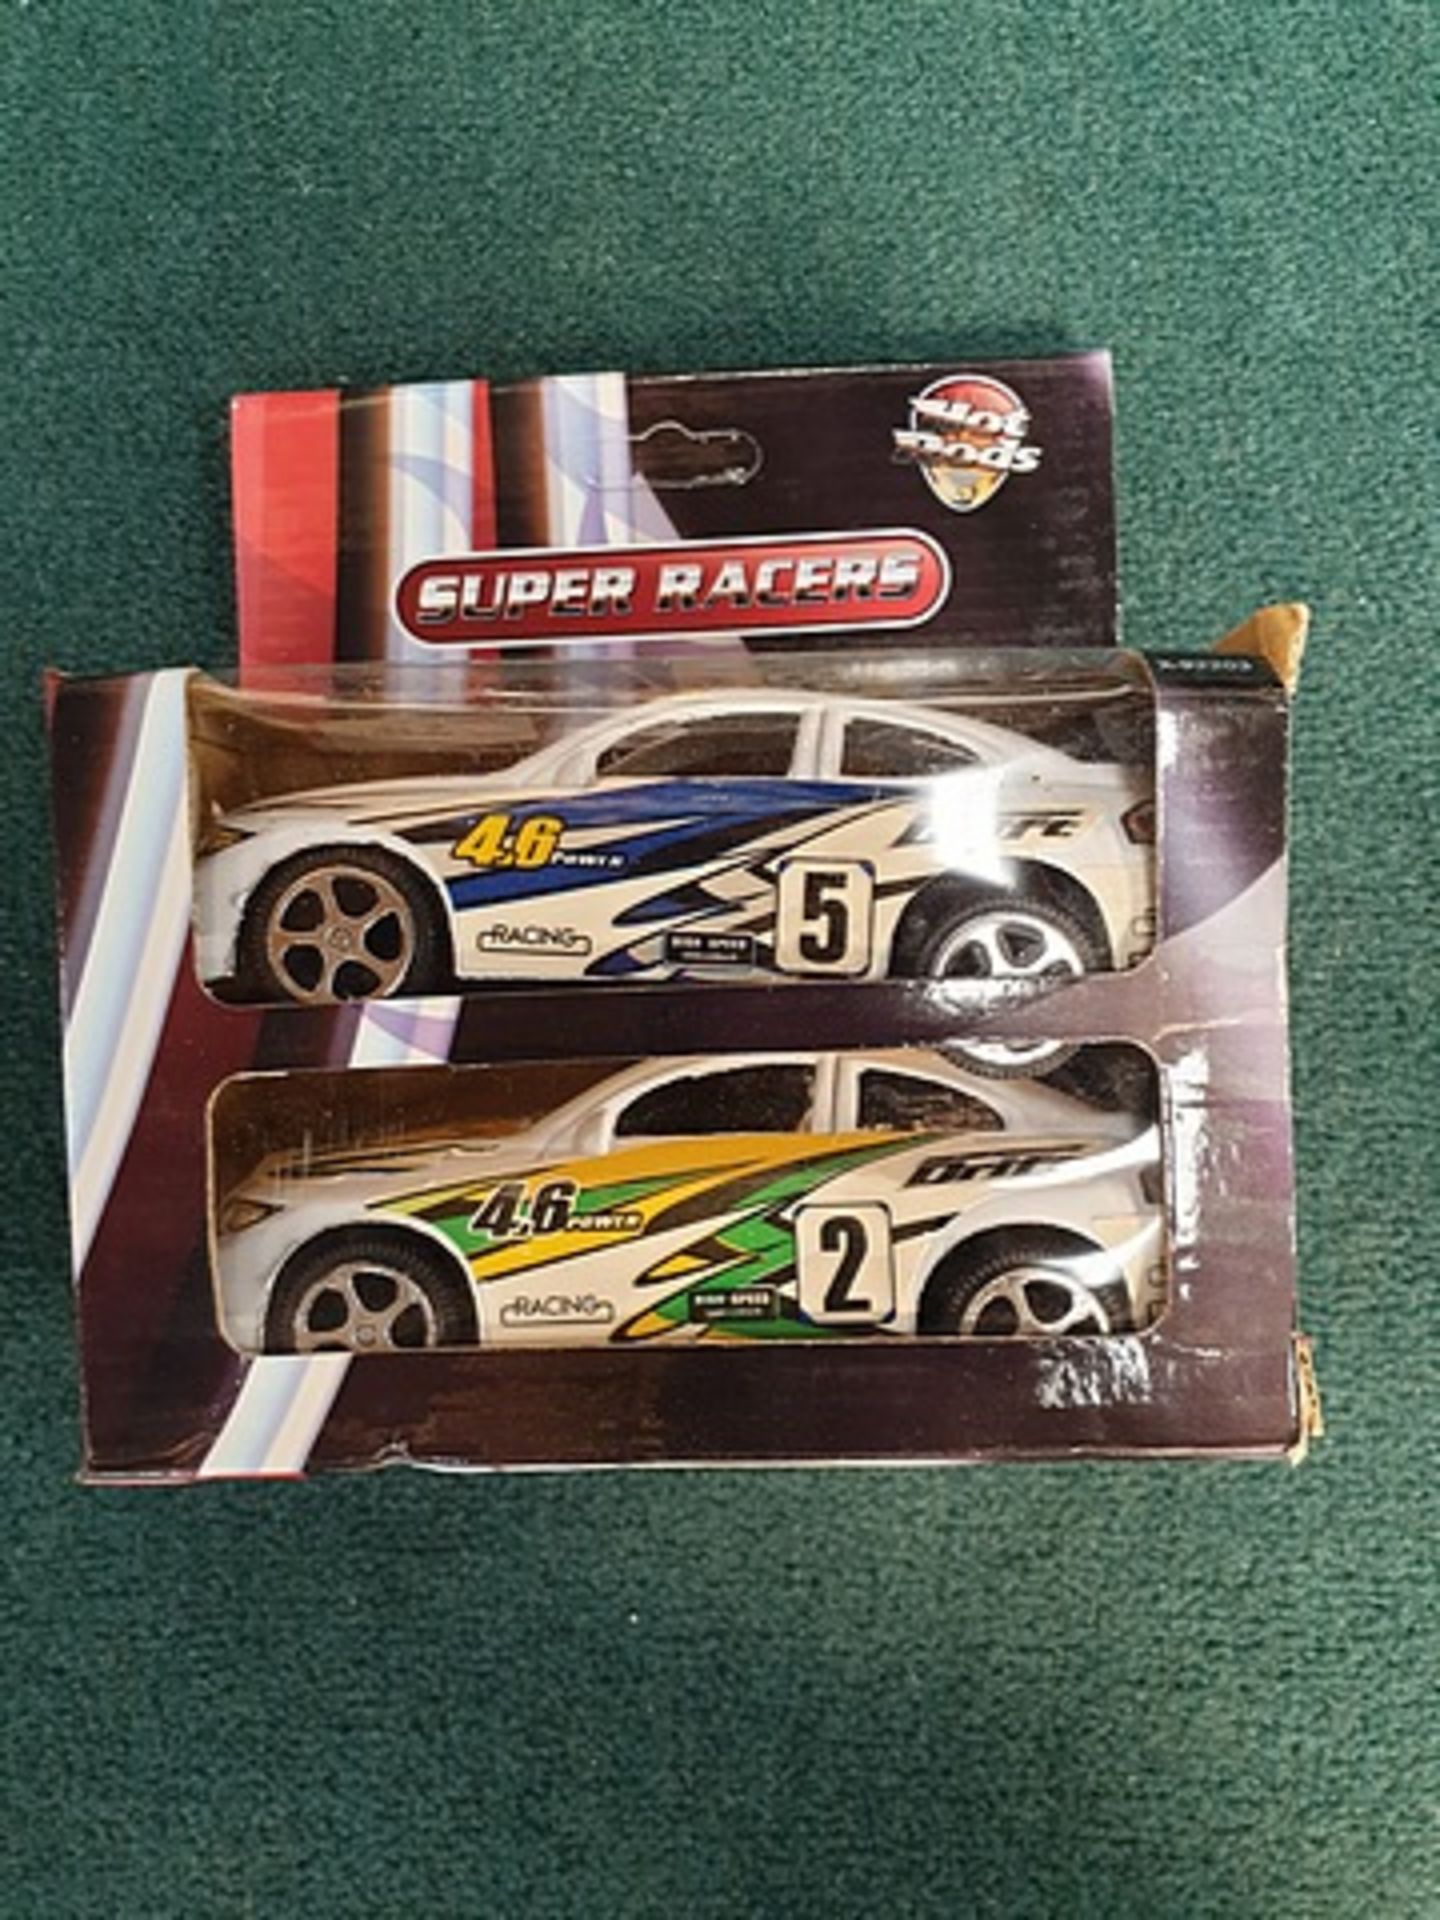 Super Racers 2 Classic Racing Cars # 88207-A Complete In Box - Image 2 of 2